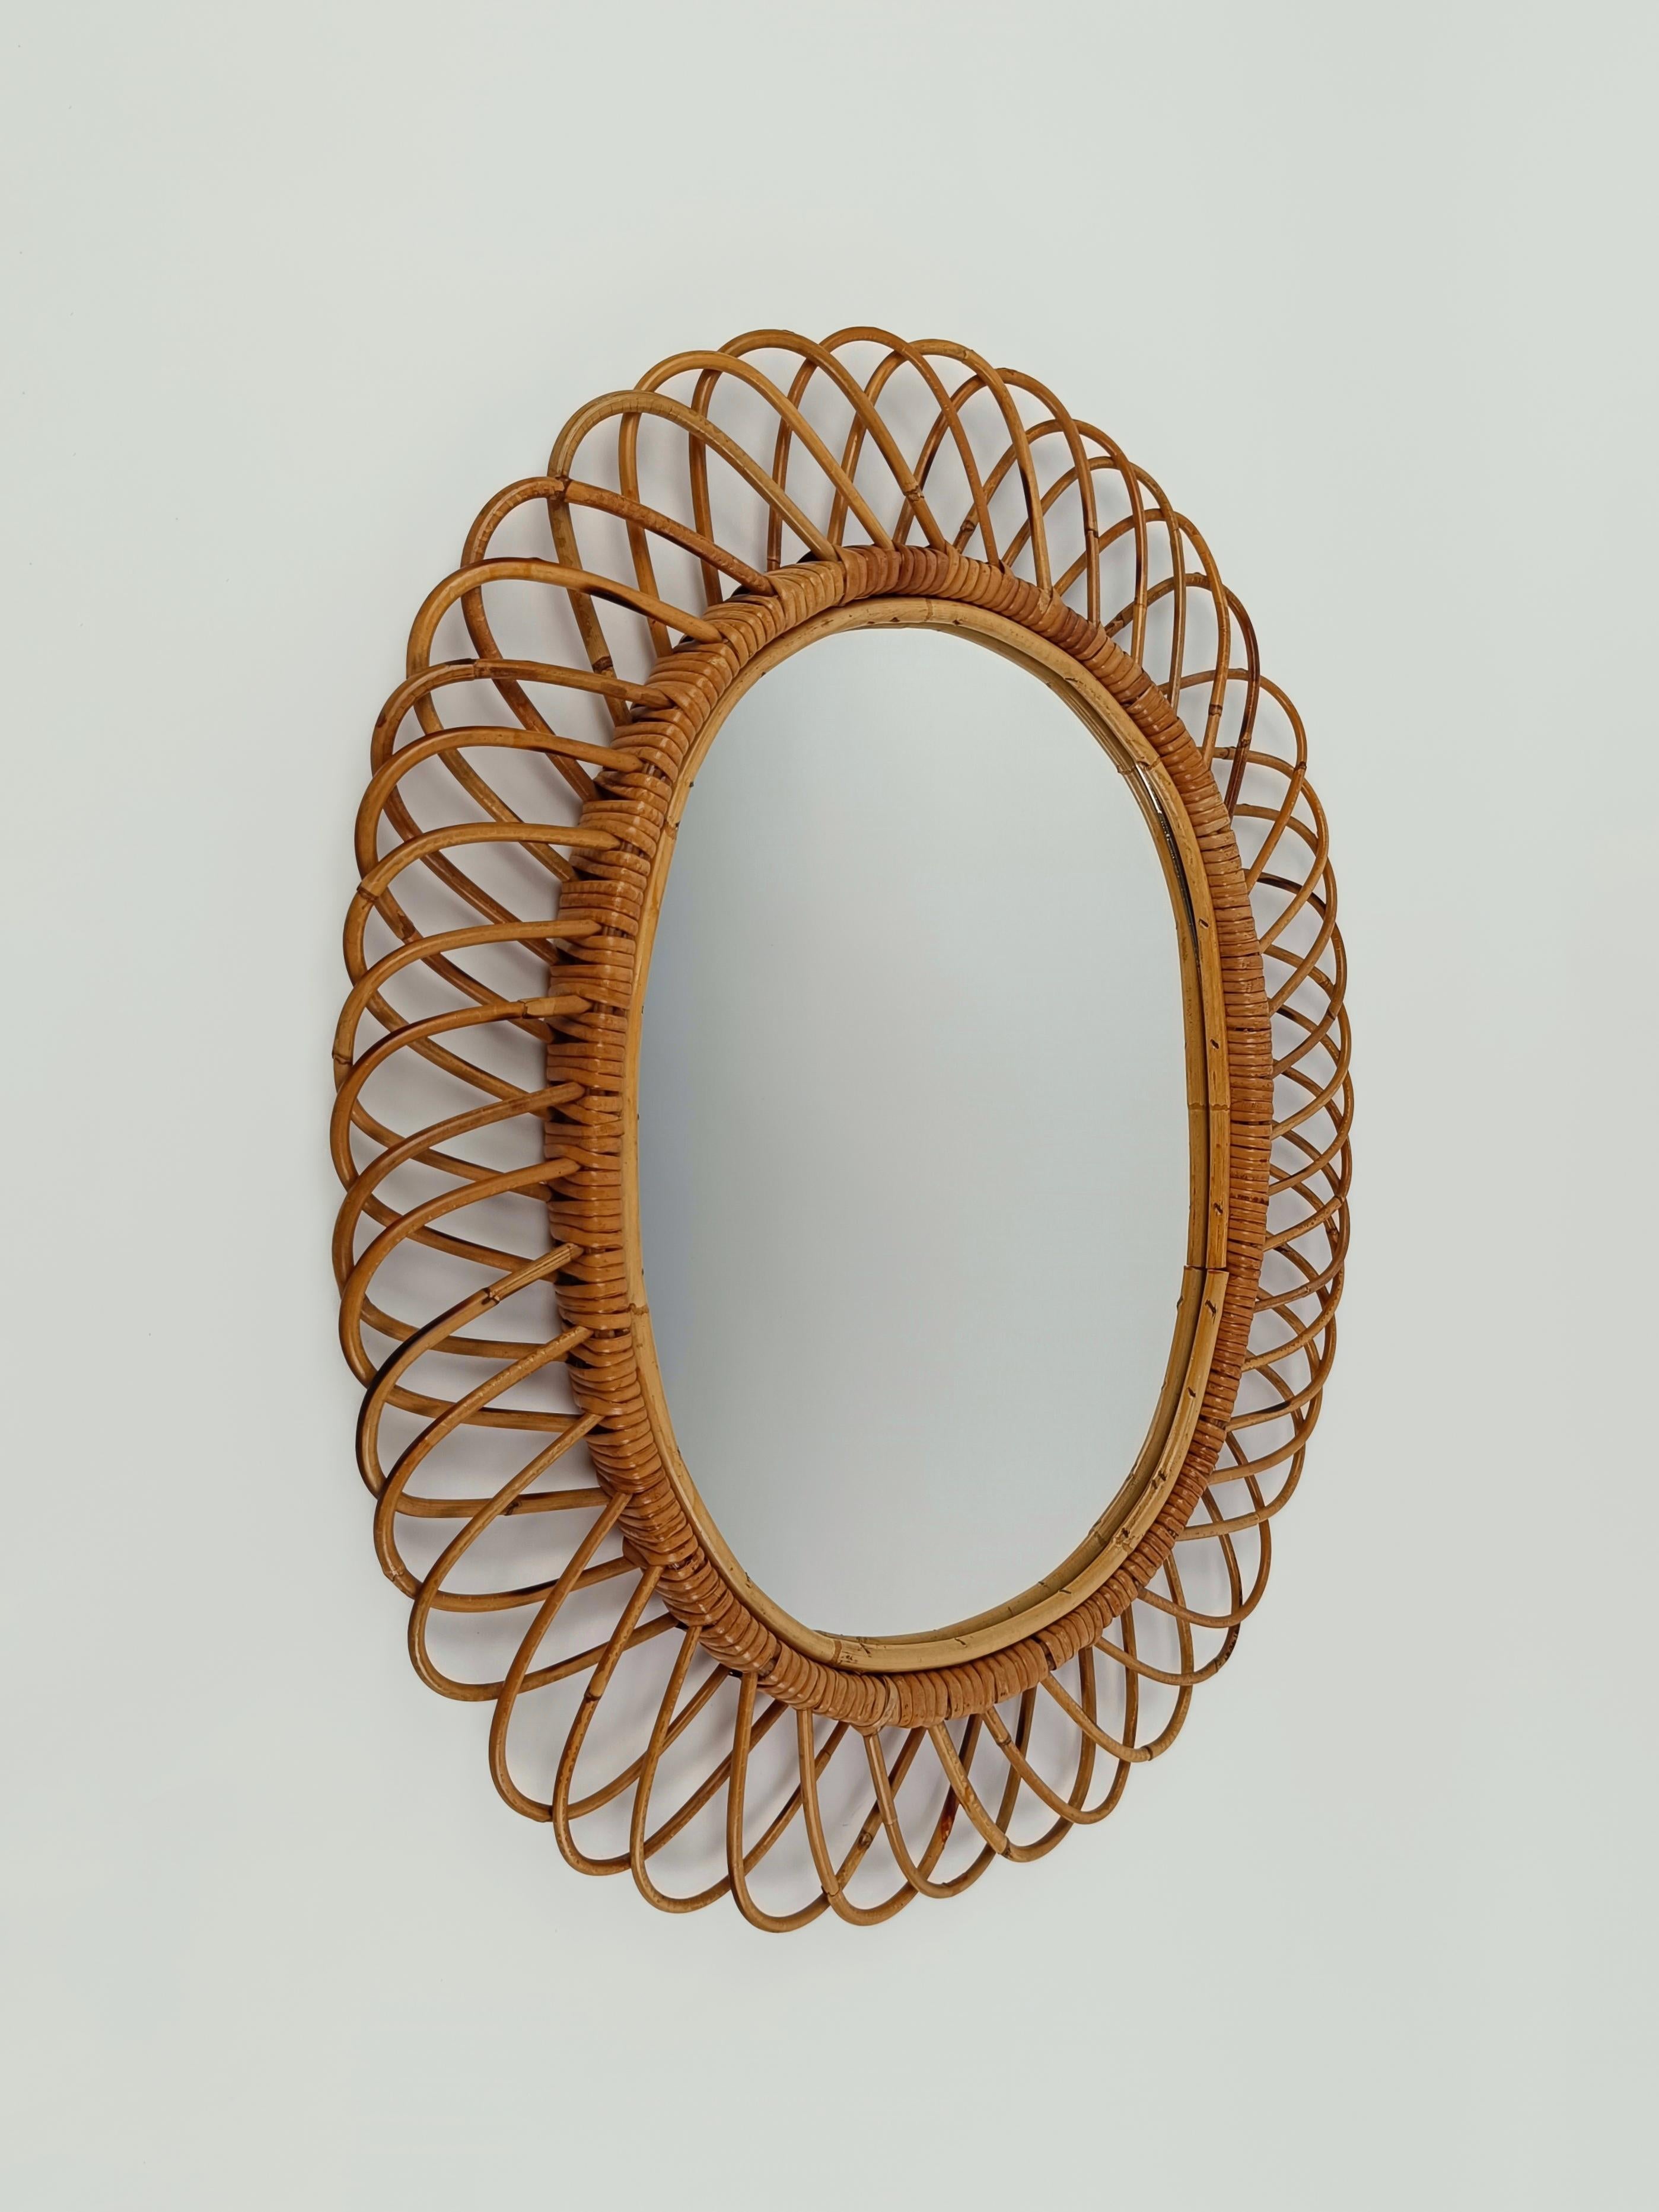  Italian Oval Mirror made in Bamboo, Cane and Rattan in the Riviera Style 1960s  For Sale 3